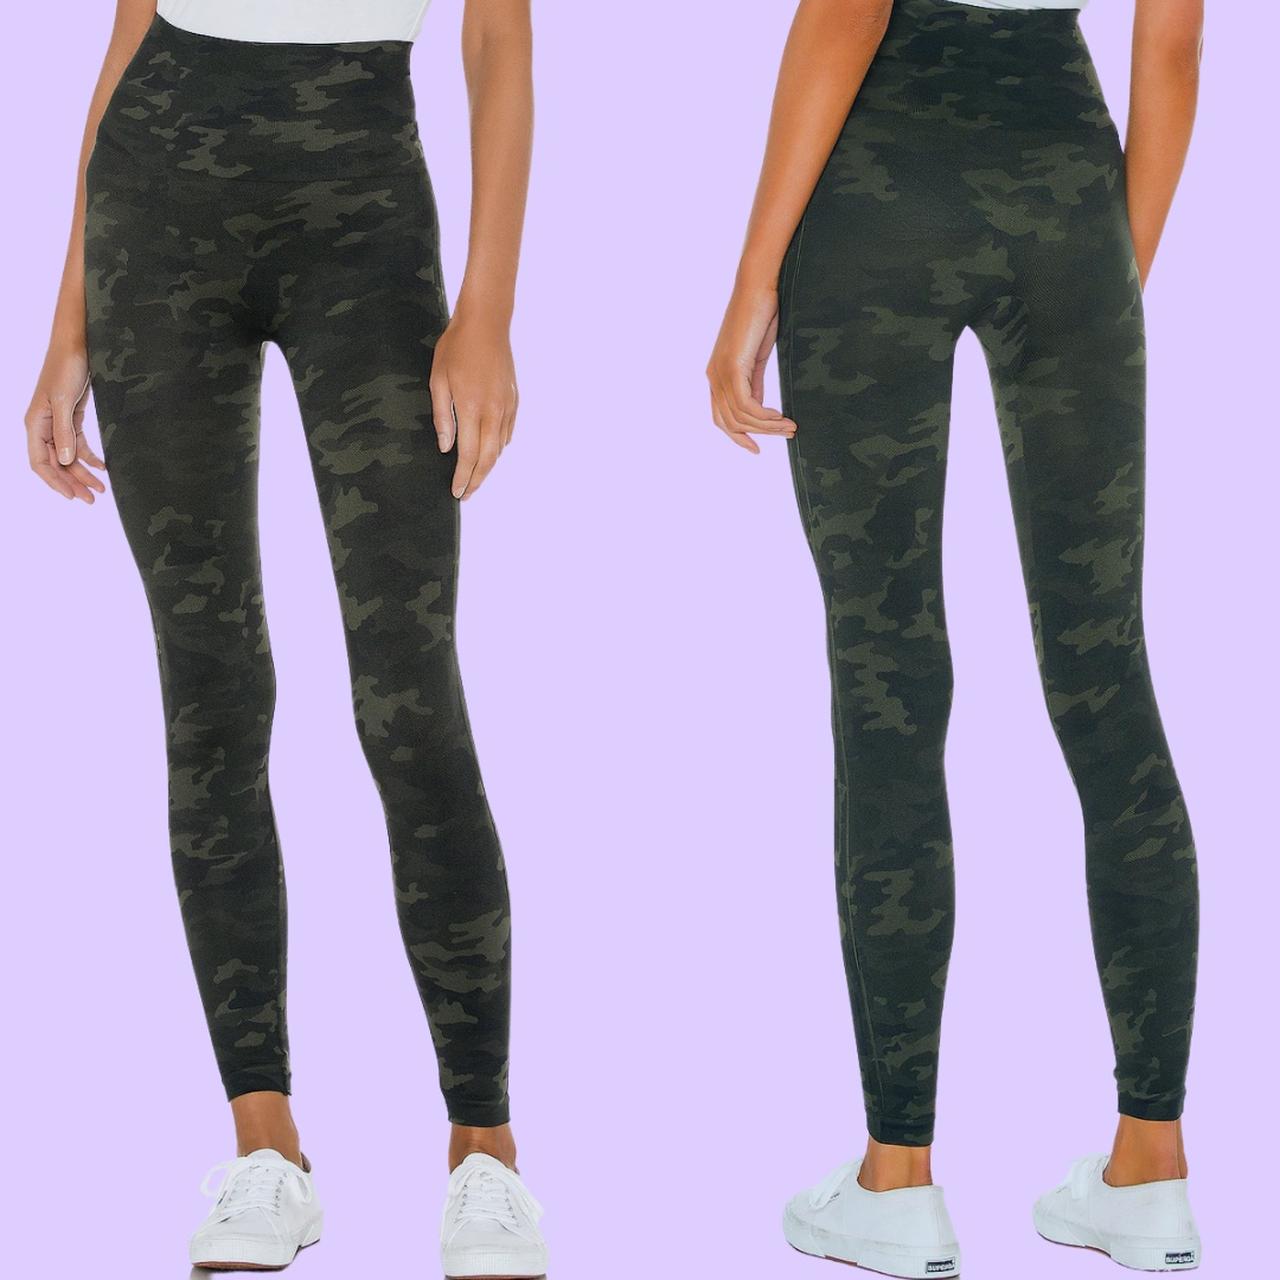 Look At Me Now Seamless Leggings in Green Camo